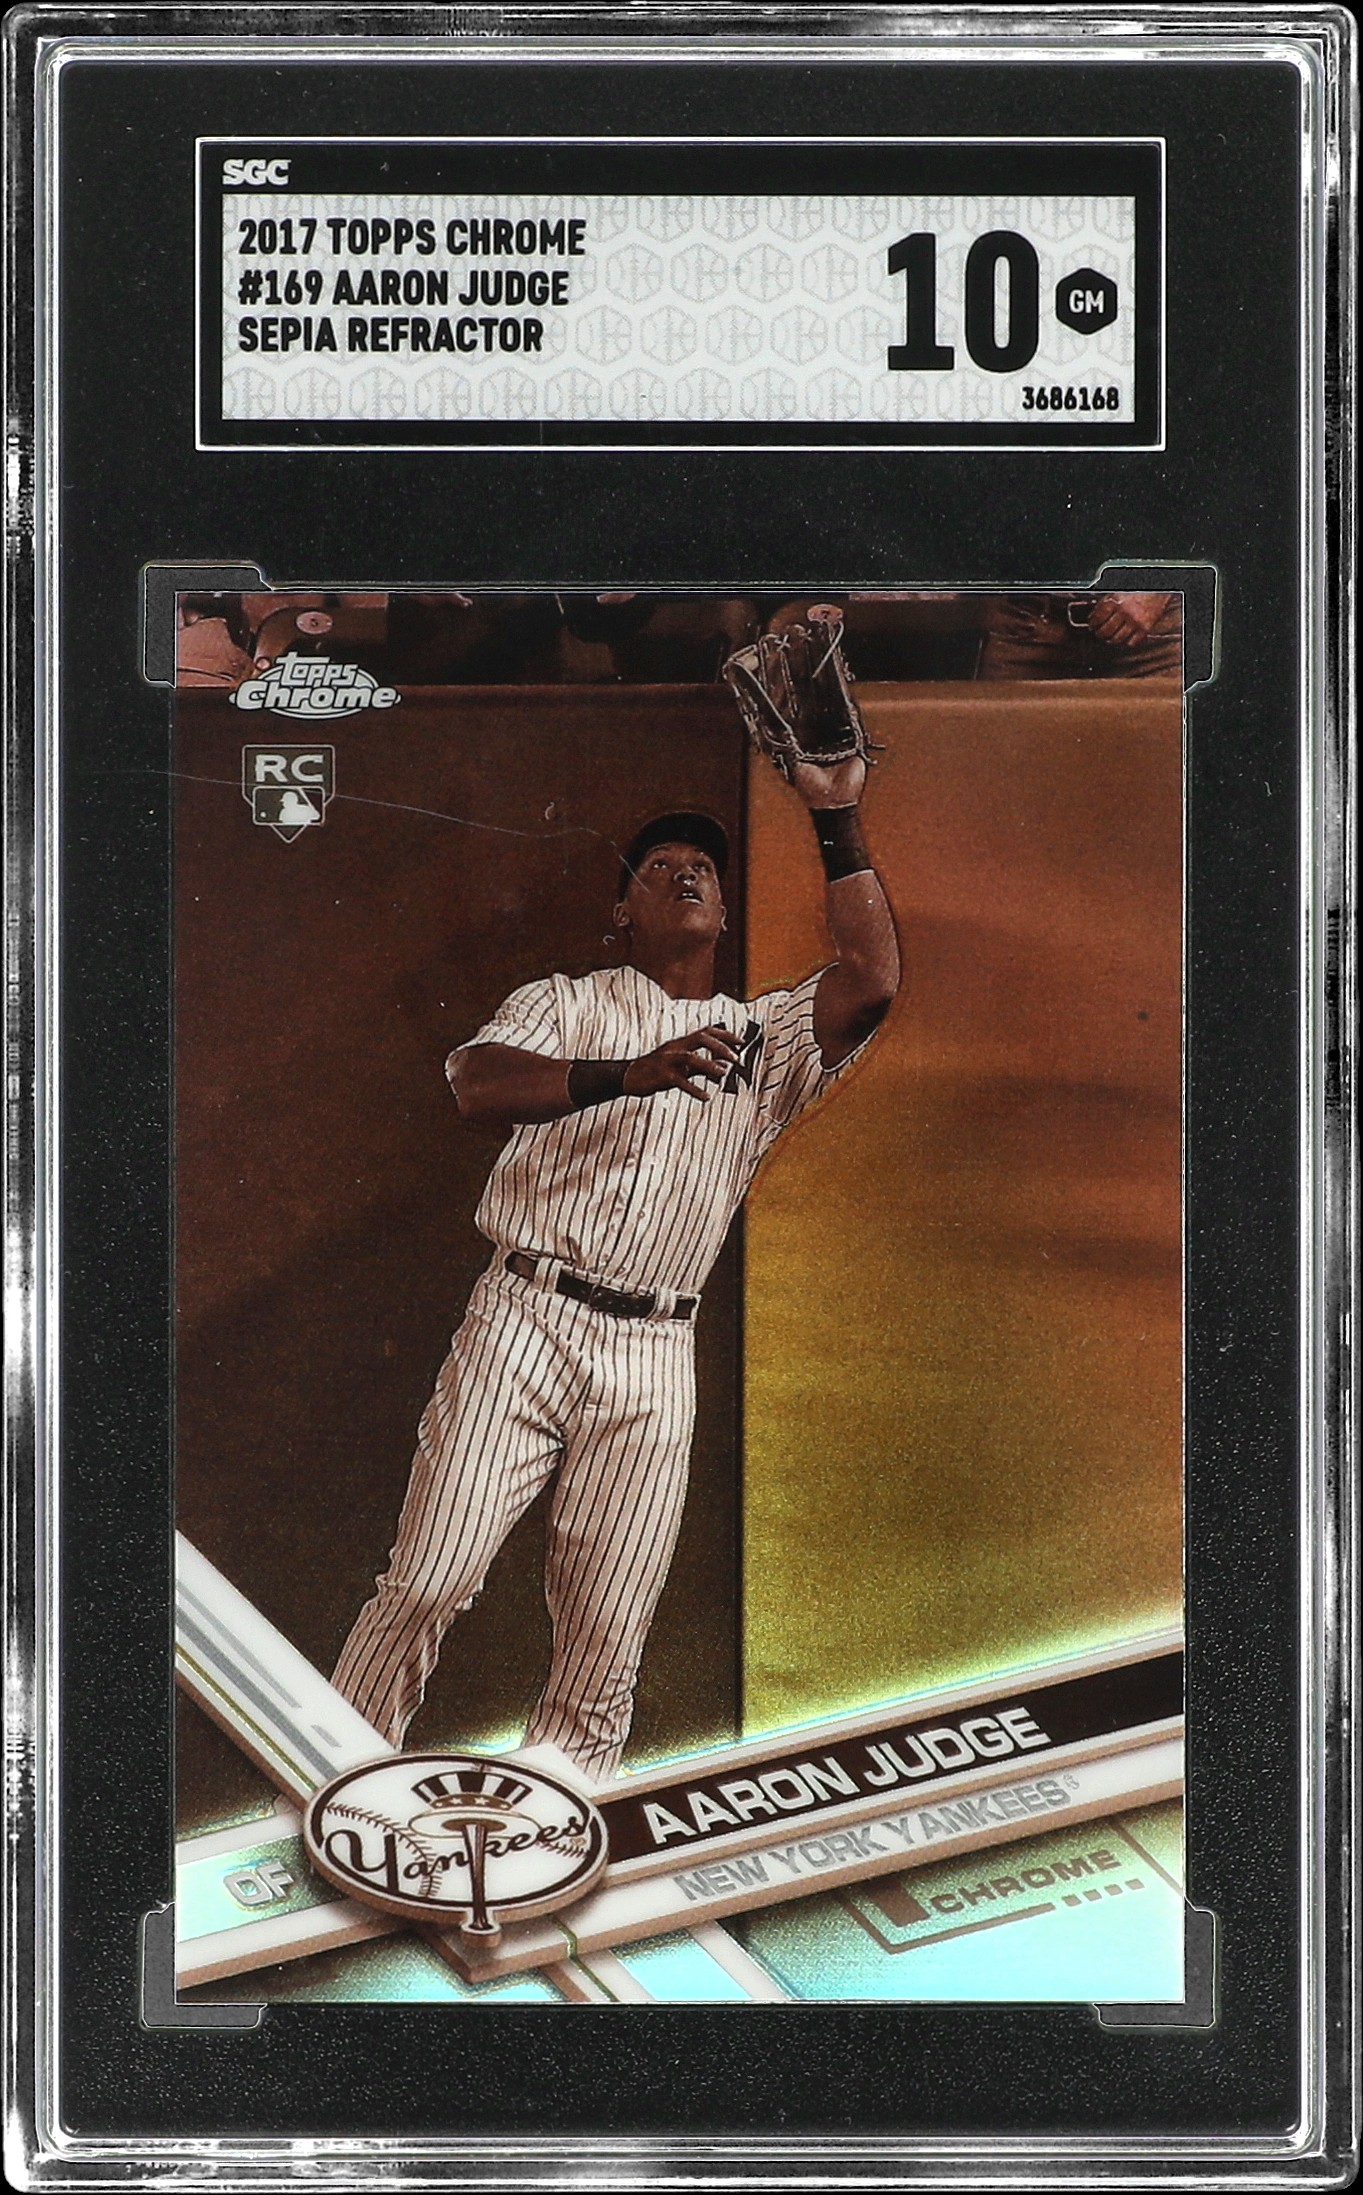 2017 Topps Chrome Sepia Refractor #169 Aaron Judge Rookie Card – SGC GM 10